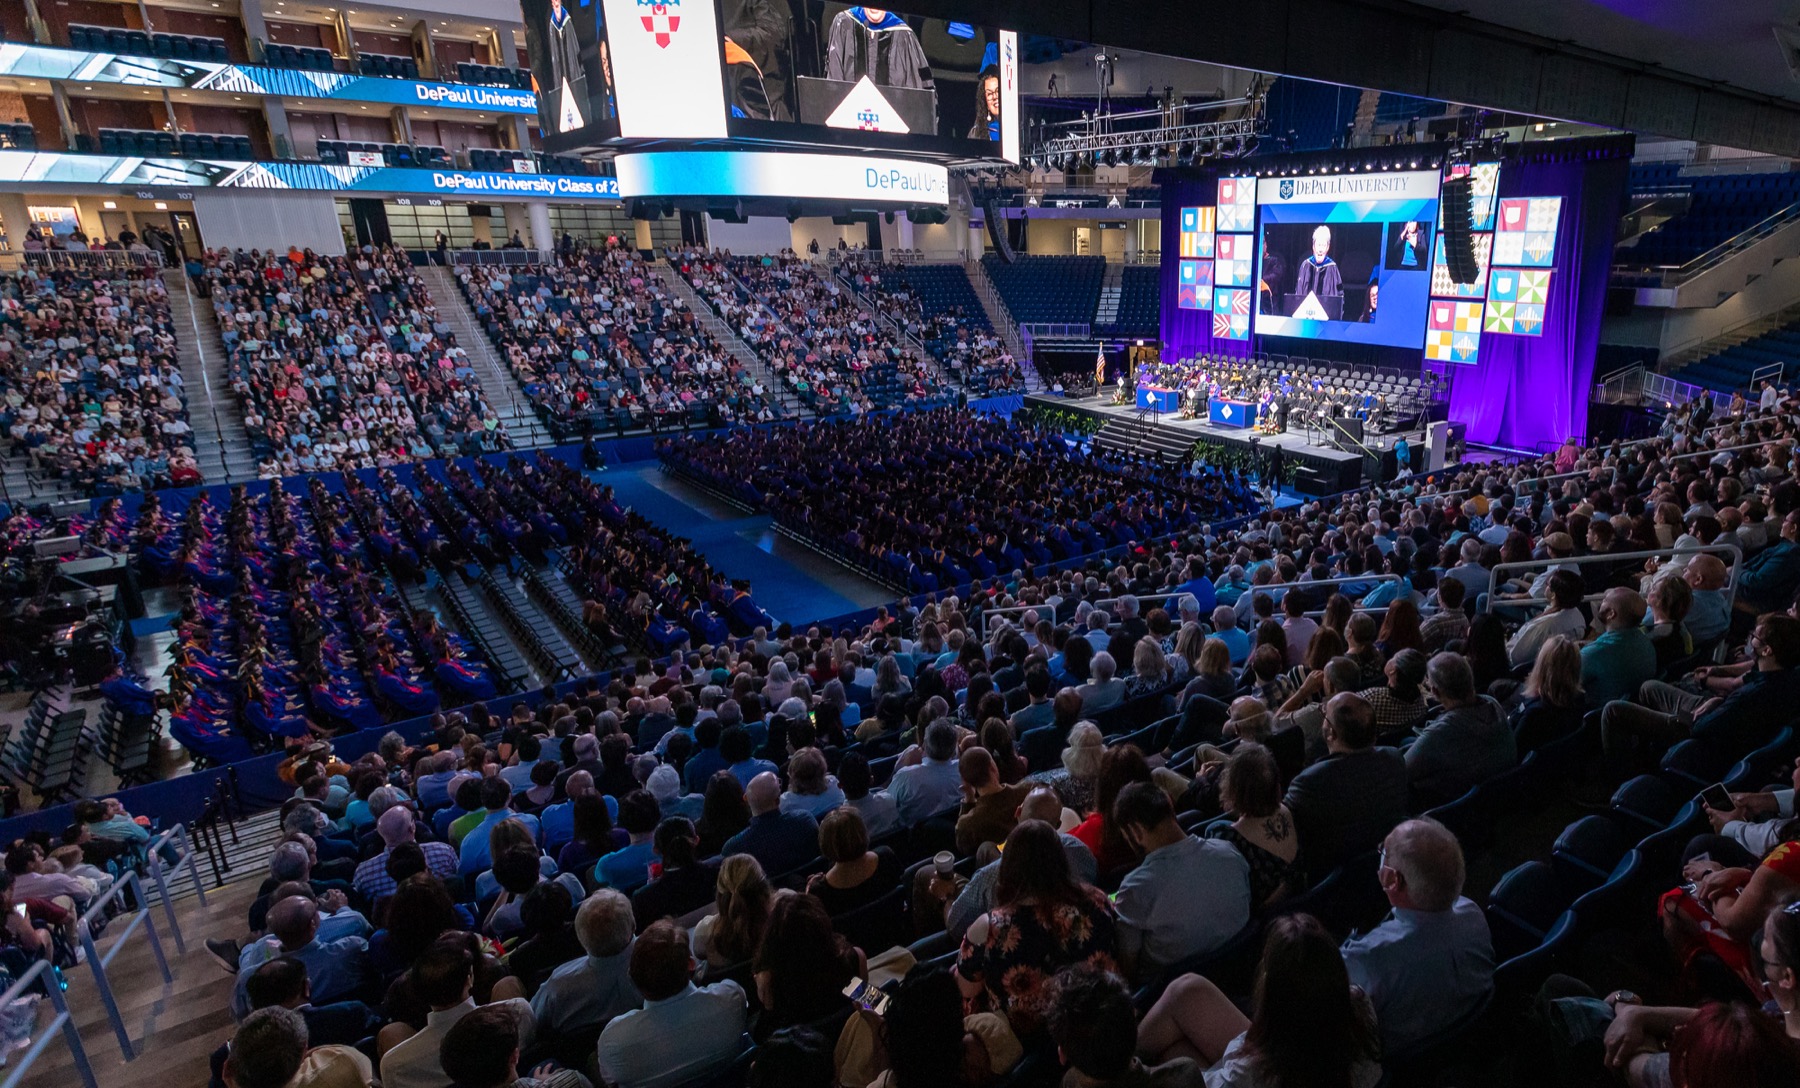 Kicking off the weekend was the ceremony for The Theatre School and the Jarvis College of Computing and Digital Media, Saturday, June 11, at the Wintrust Arena.